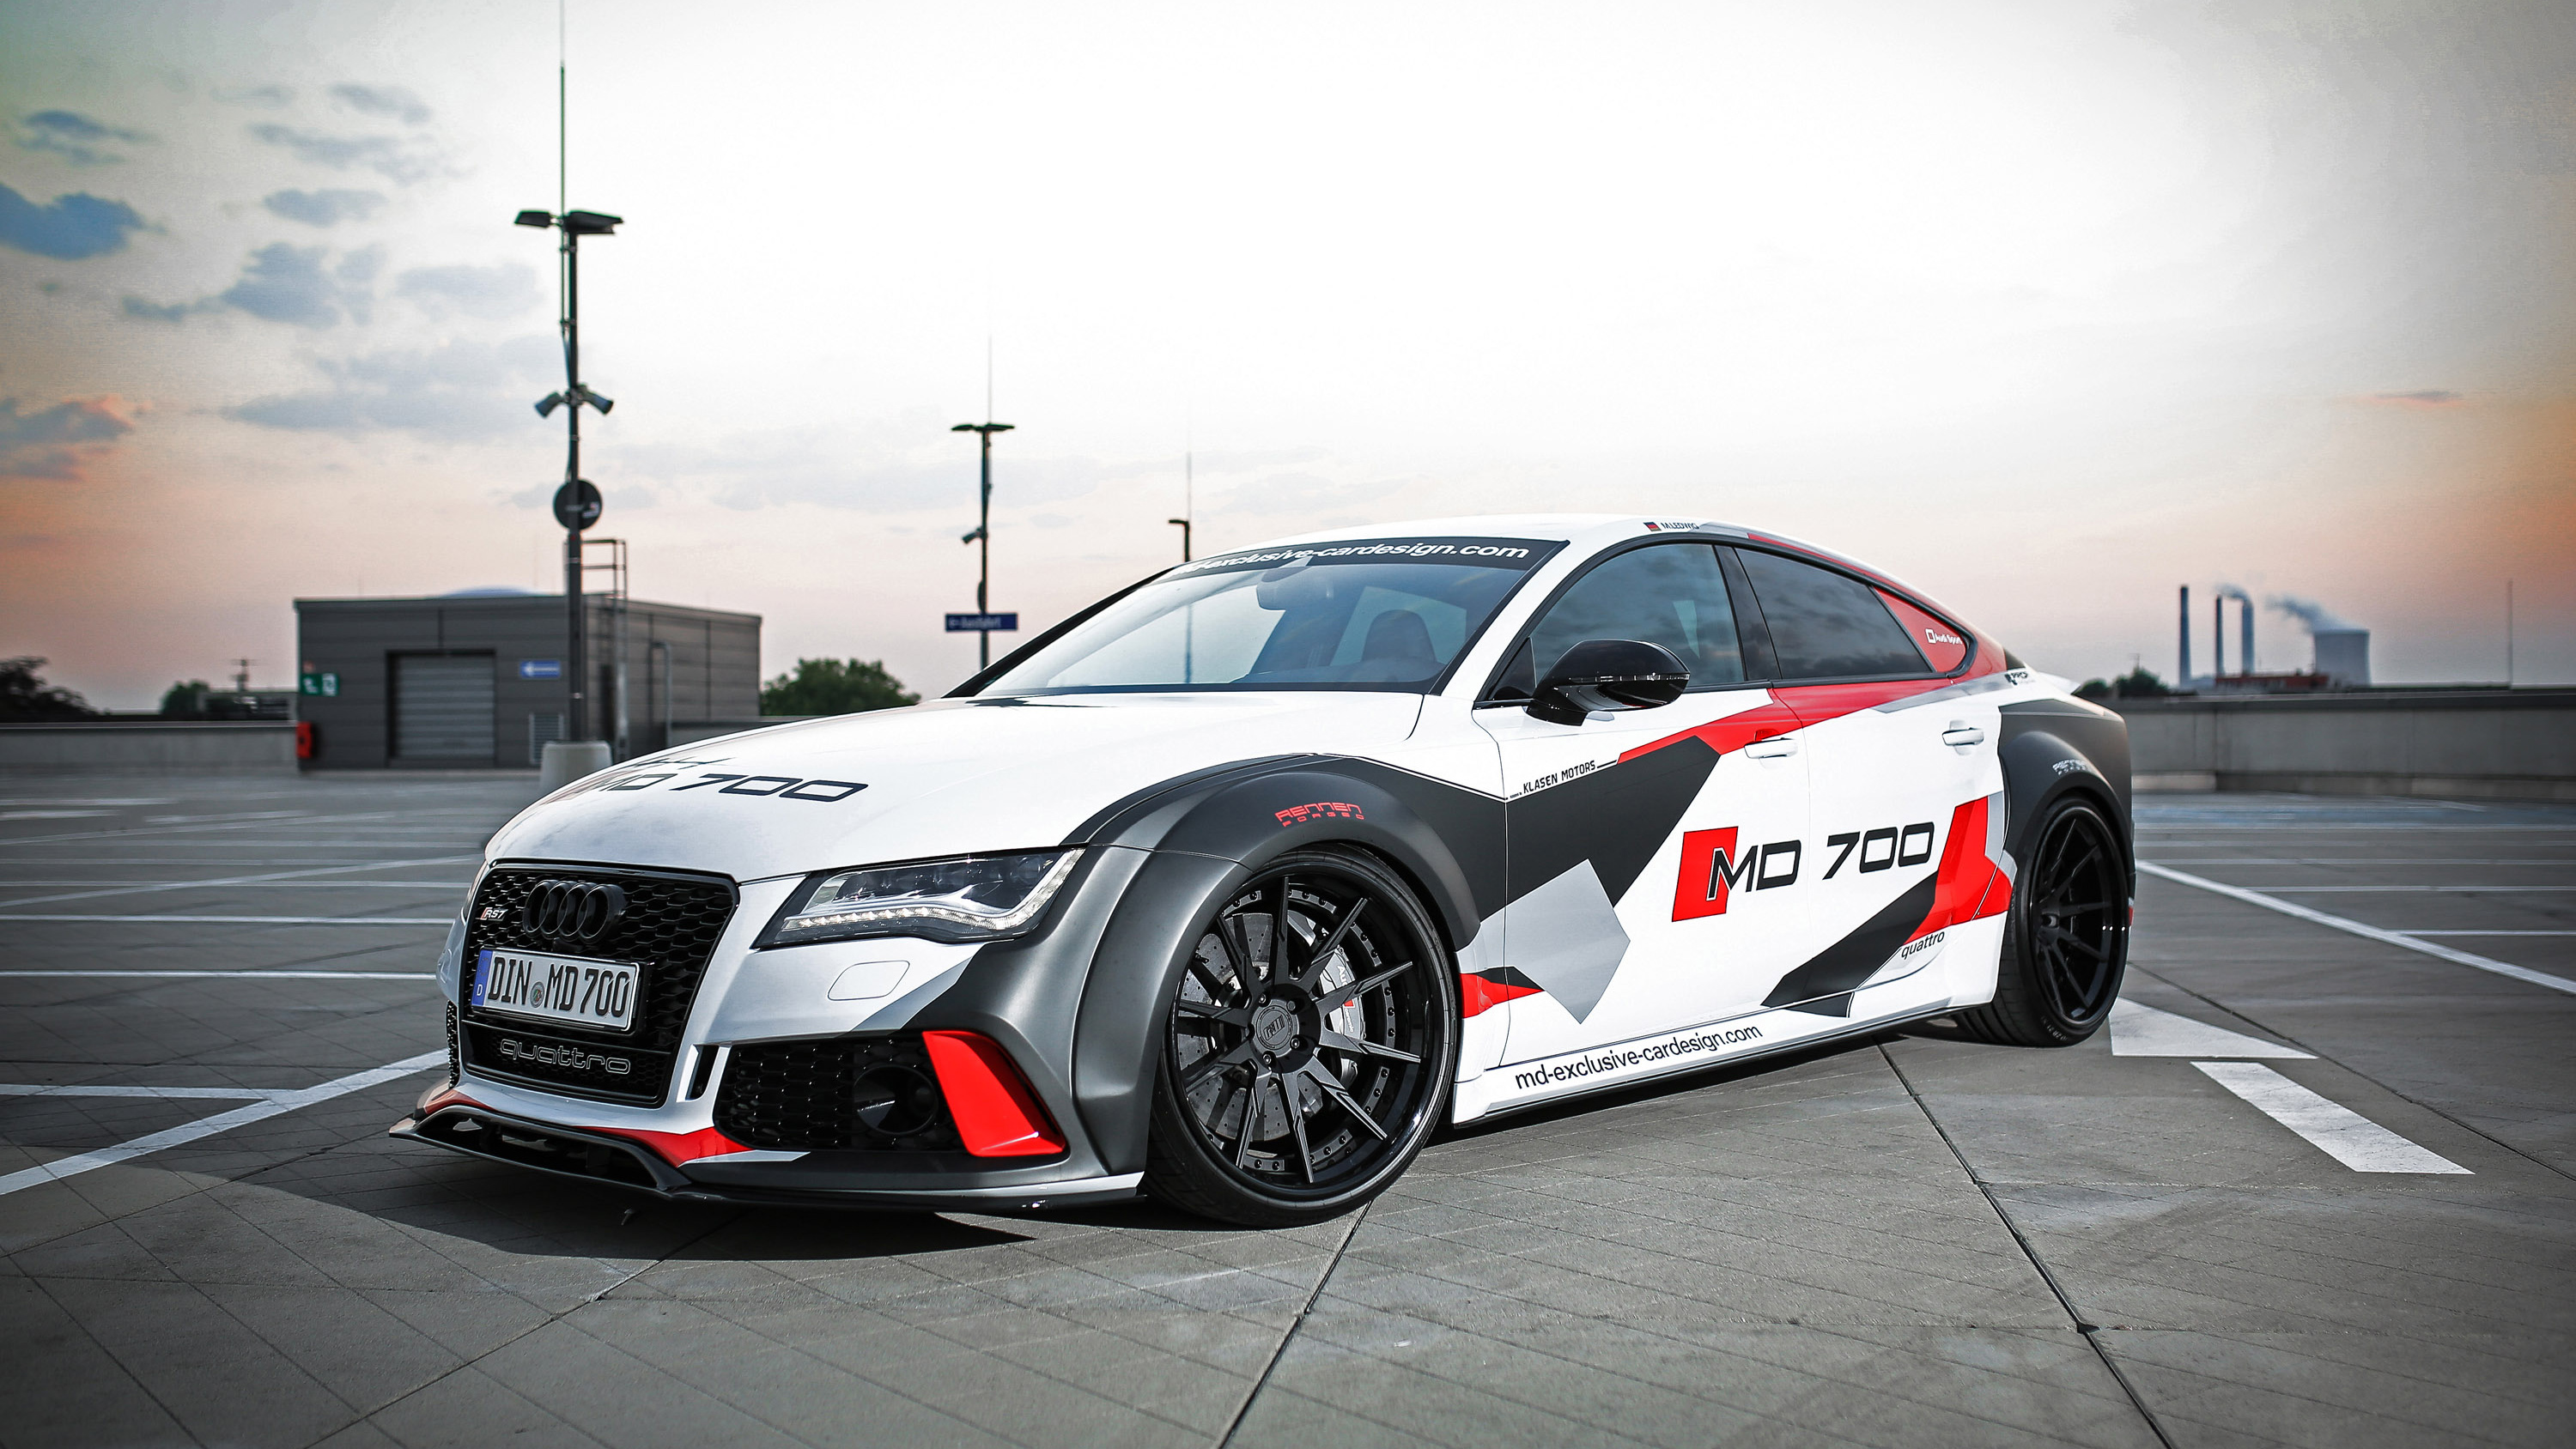 Audi RS7 Wallpaper and Background Image